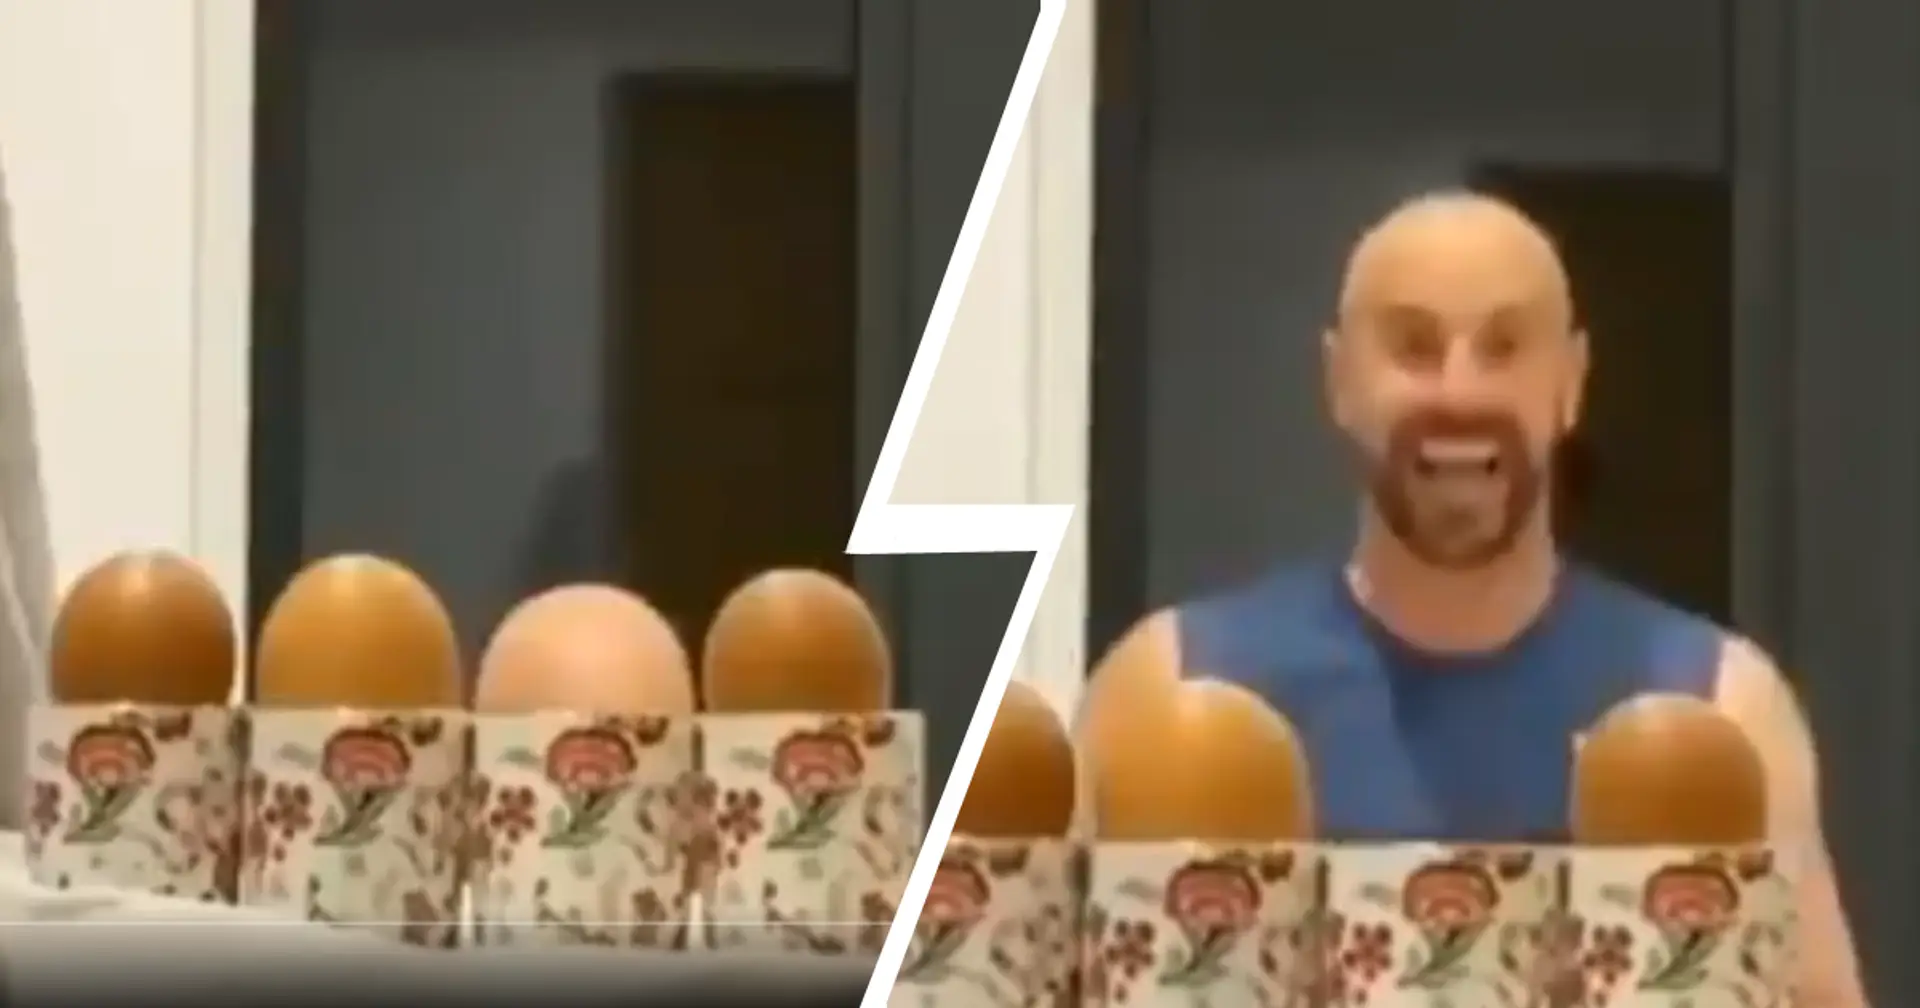 Pepe Reina's hilarious video has lifted our moods this quarantine period